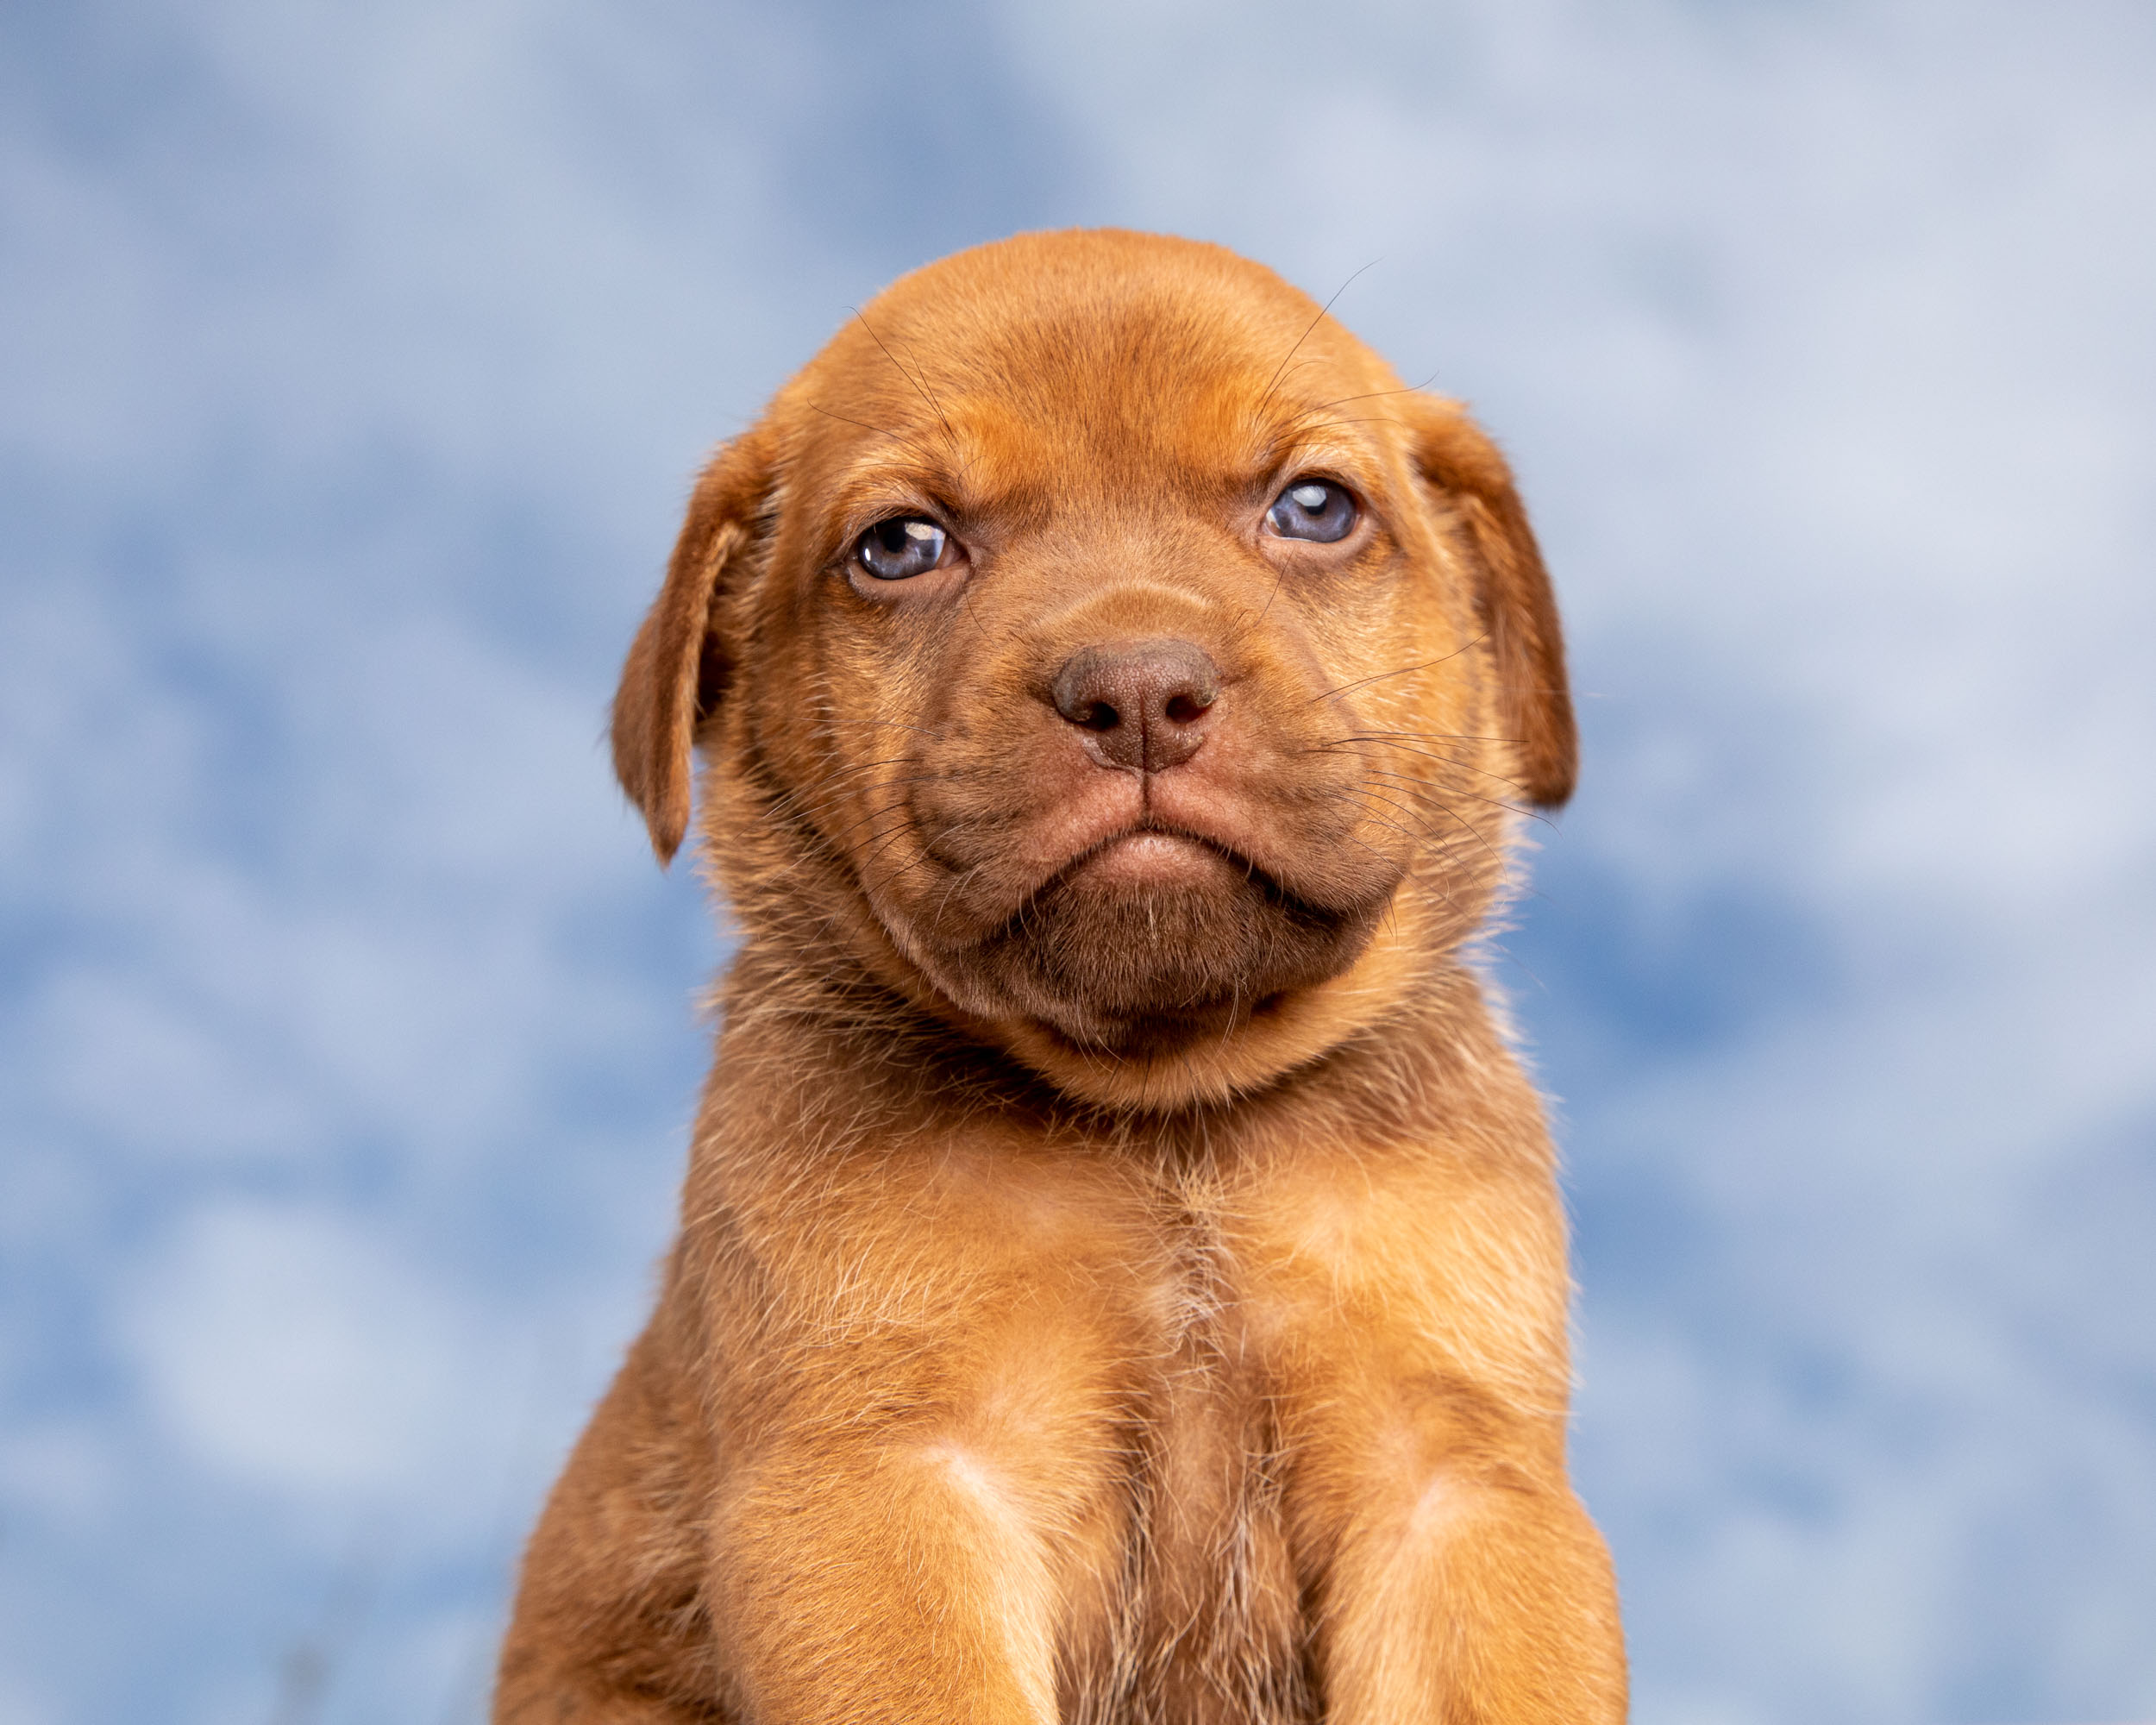 Puppy Photography | Grumpy Red Puppy in Clouds by Mark Rogers